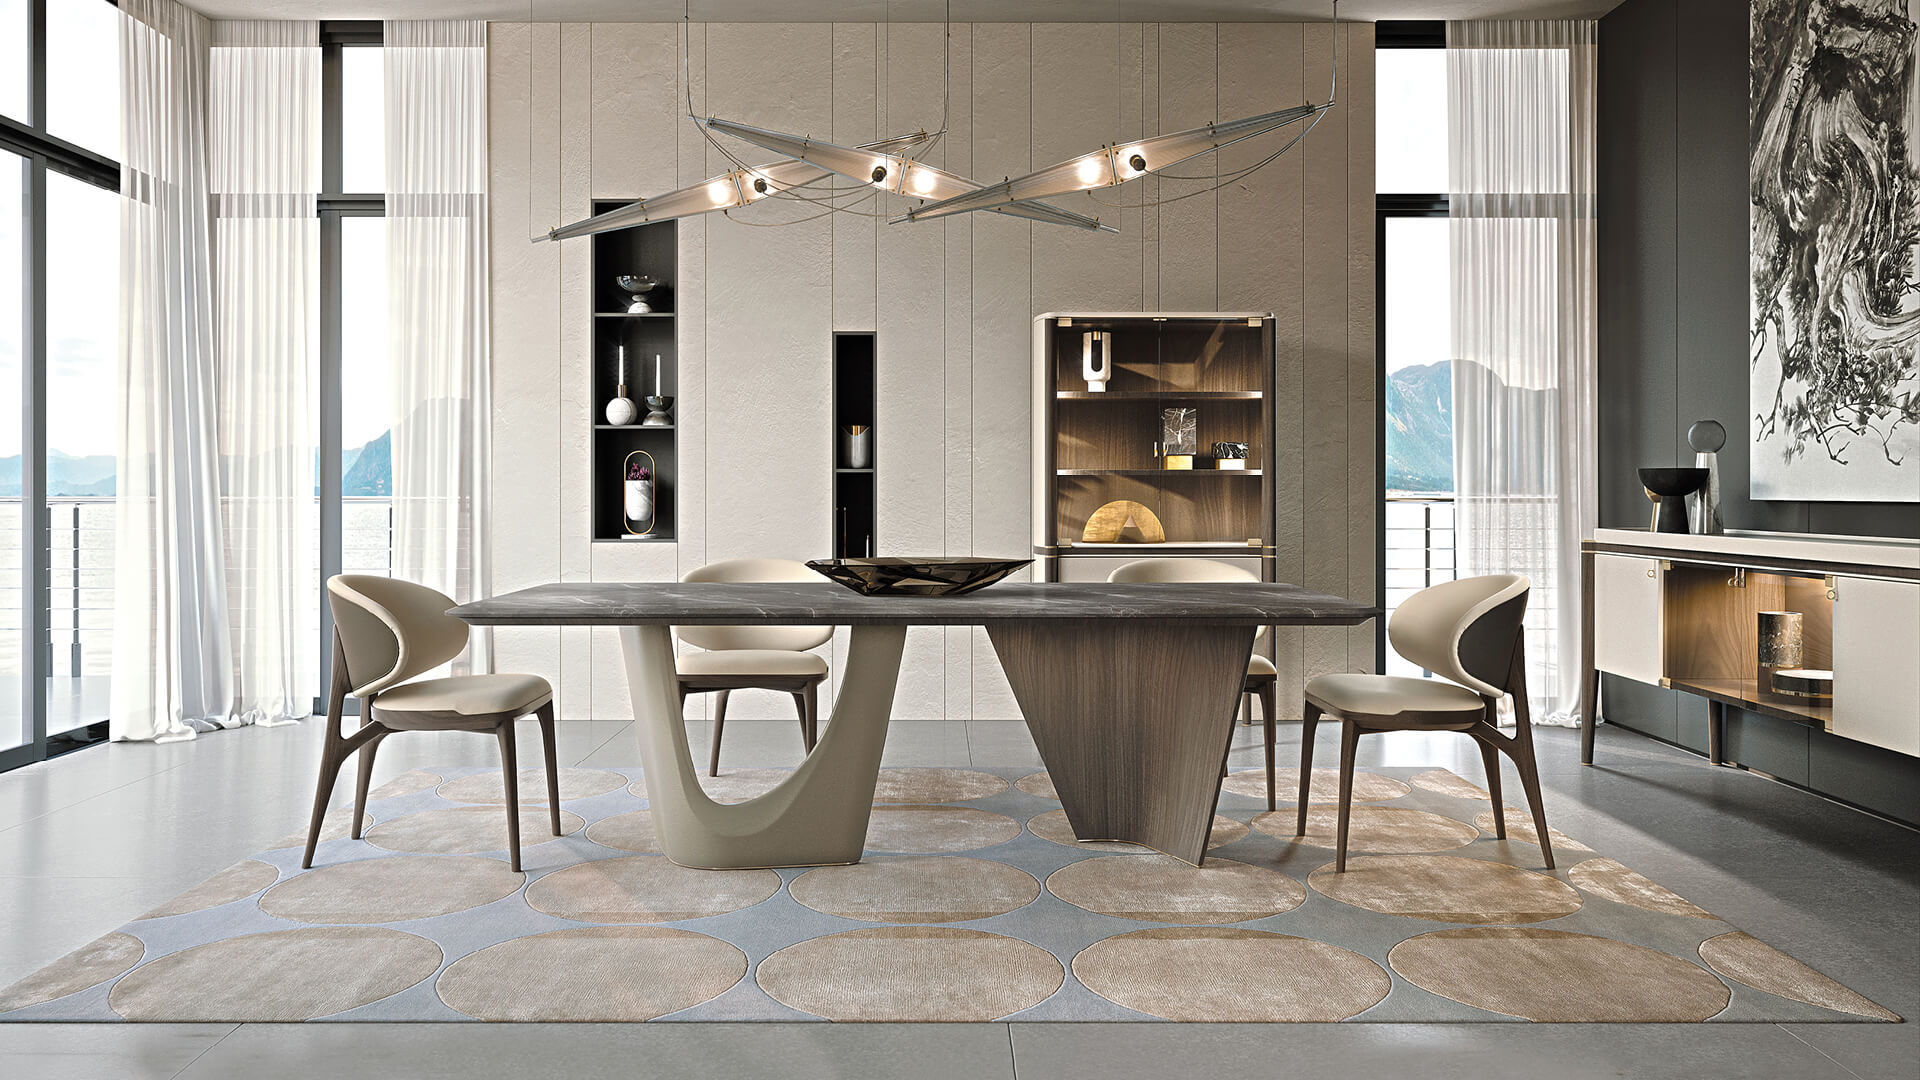 Refresh your interiors with furniture picks from Turri’s 2021 collection